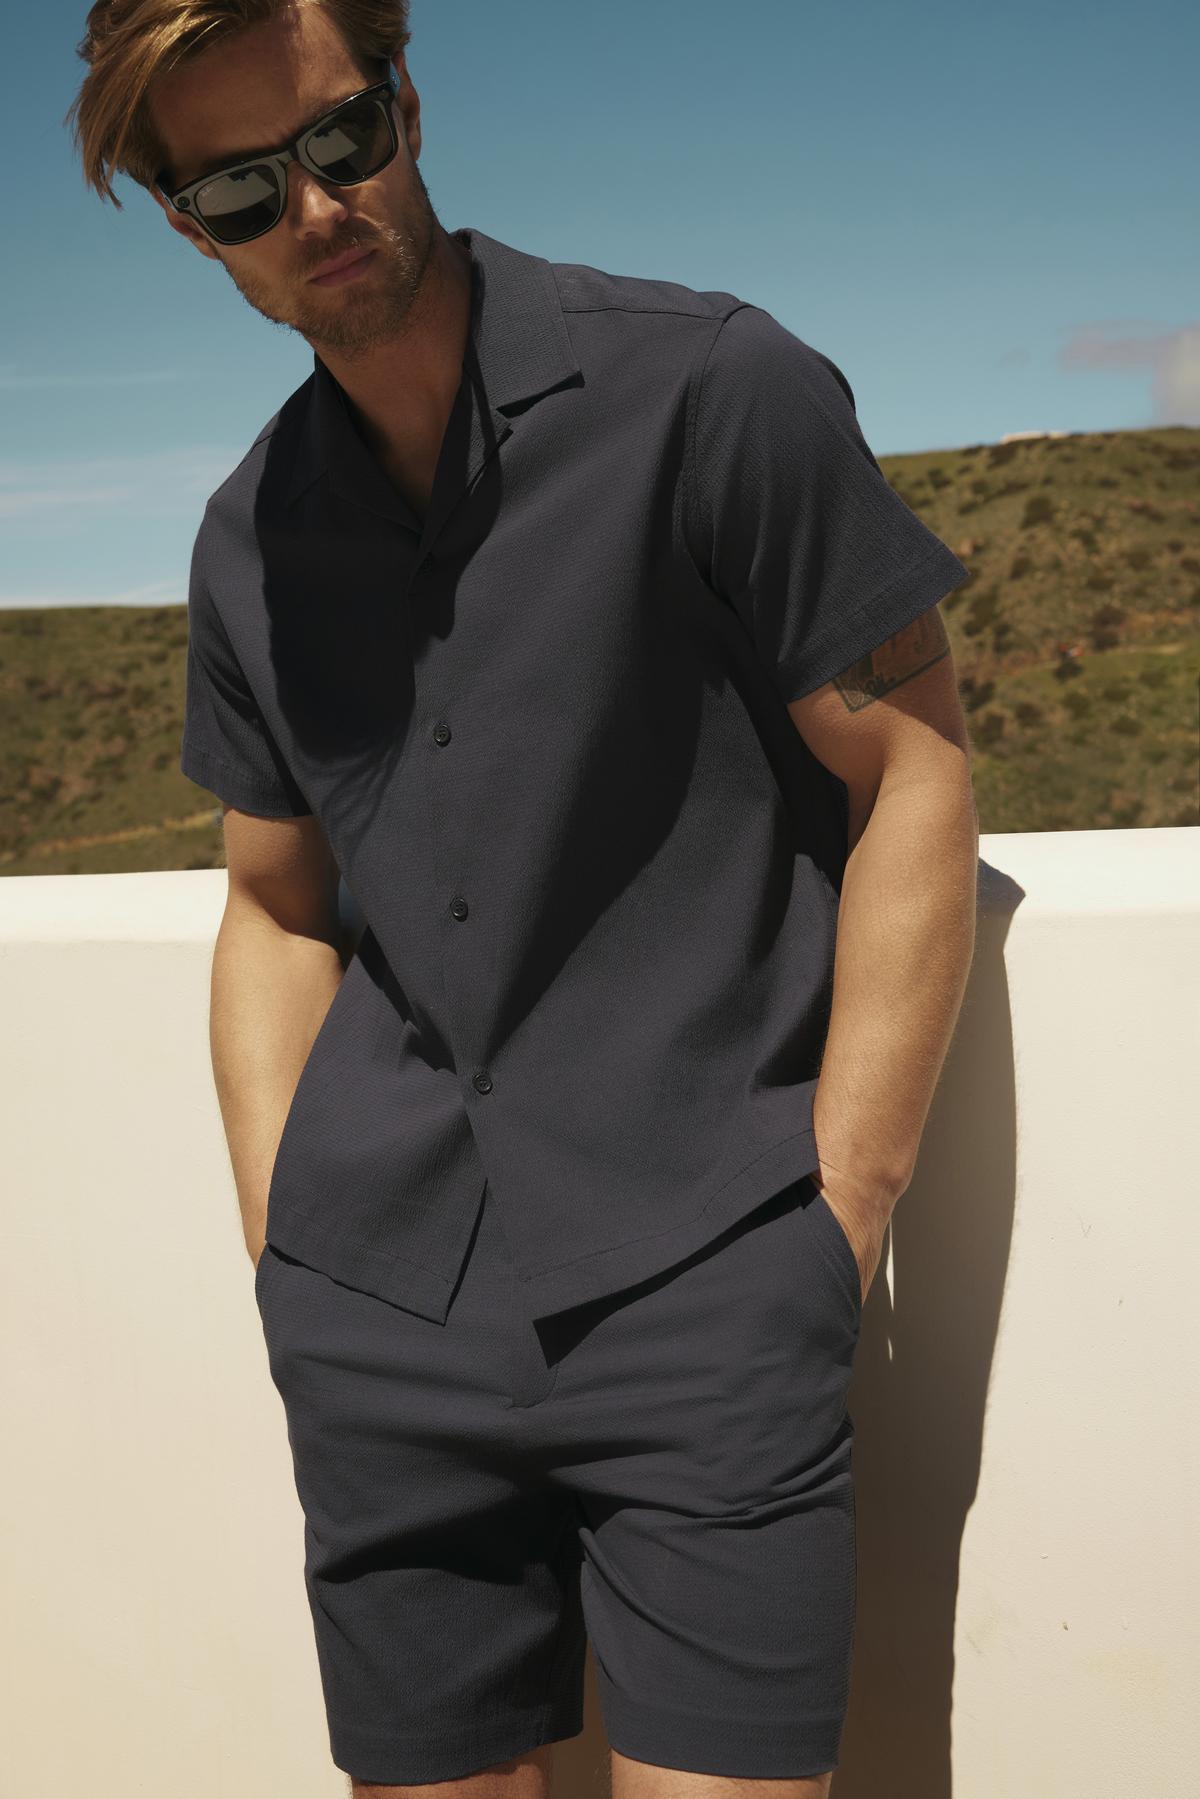 A man in sunglasses, wearing a FRANK BUTTON-UP SHIRT by Velvet by Graham & Spencer and shorts, stands against a sunlit outdoor backdrop with hills.-36753558569153